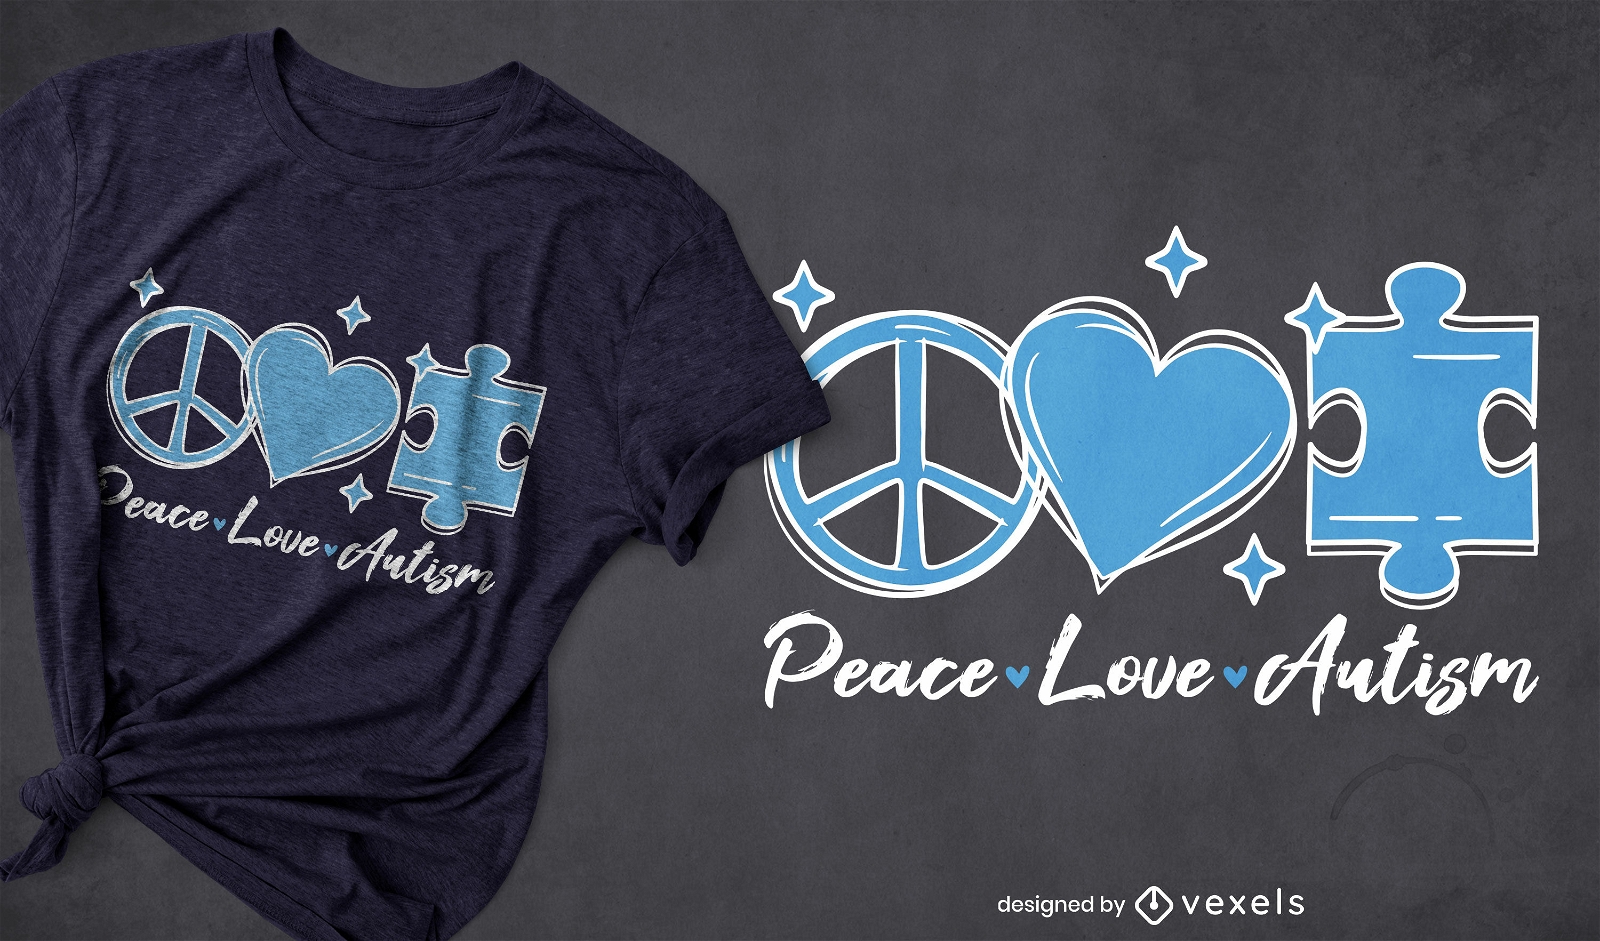 Peace and puzzle quote t-shirt design